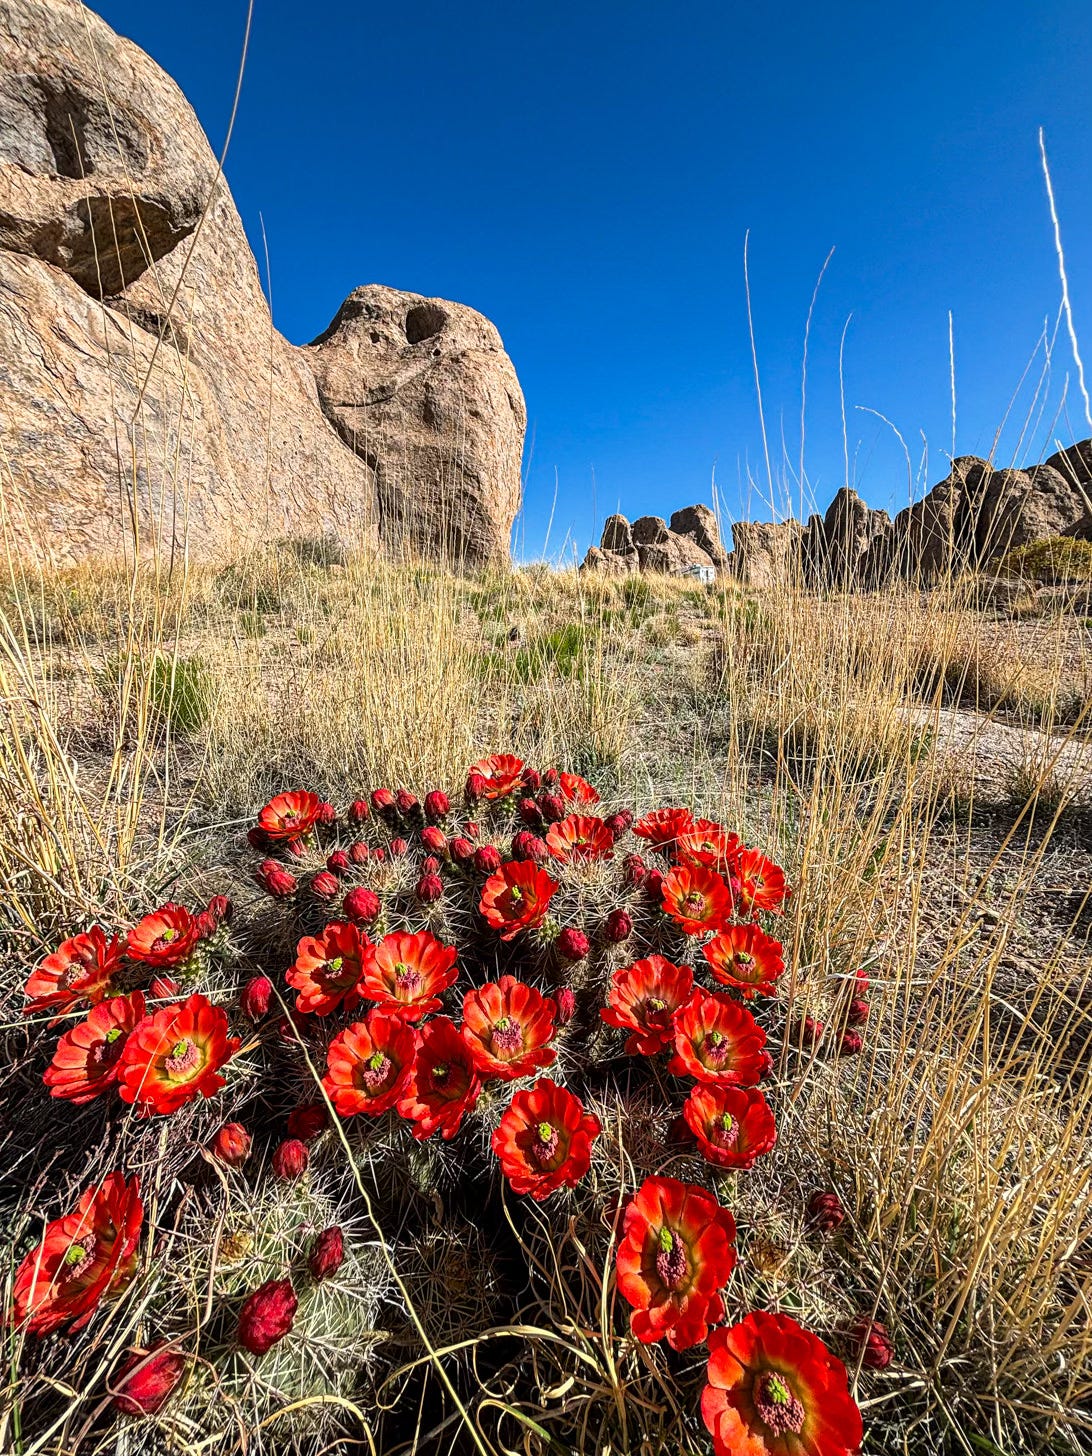 Bright red cactus flowers blooming on desert hill with big rocks in background